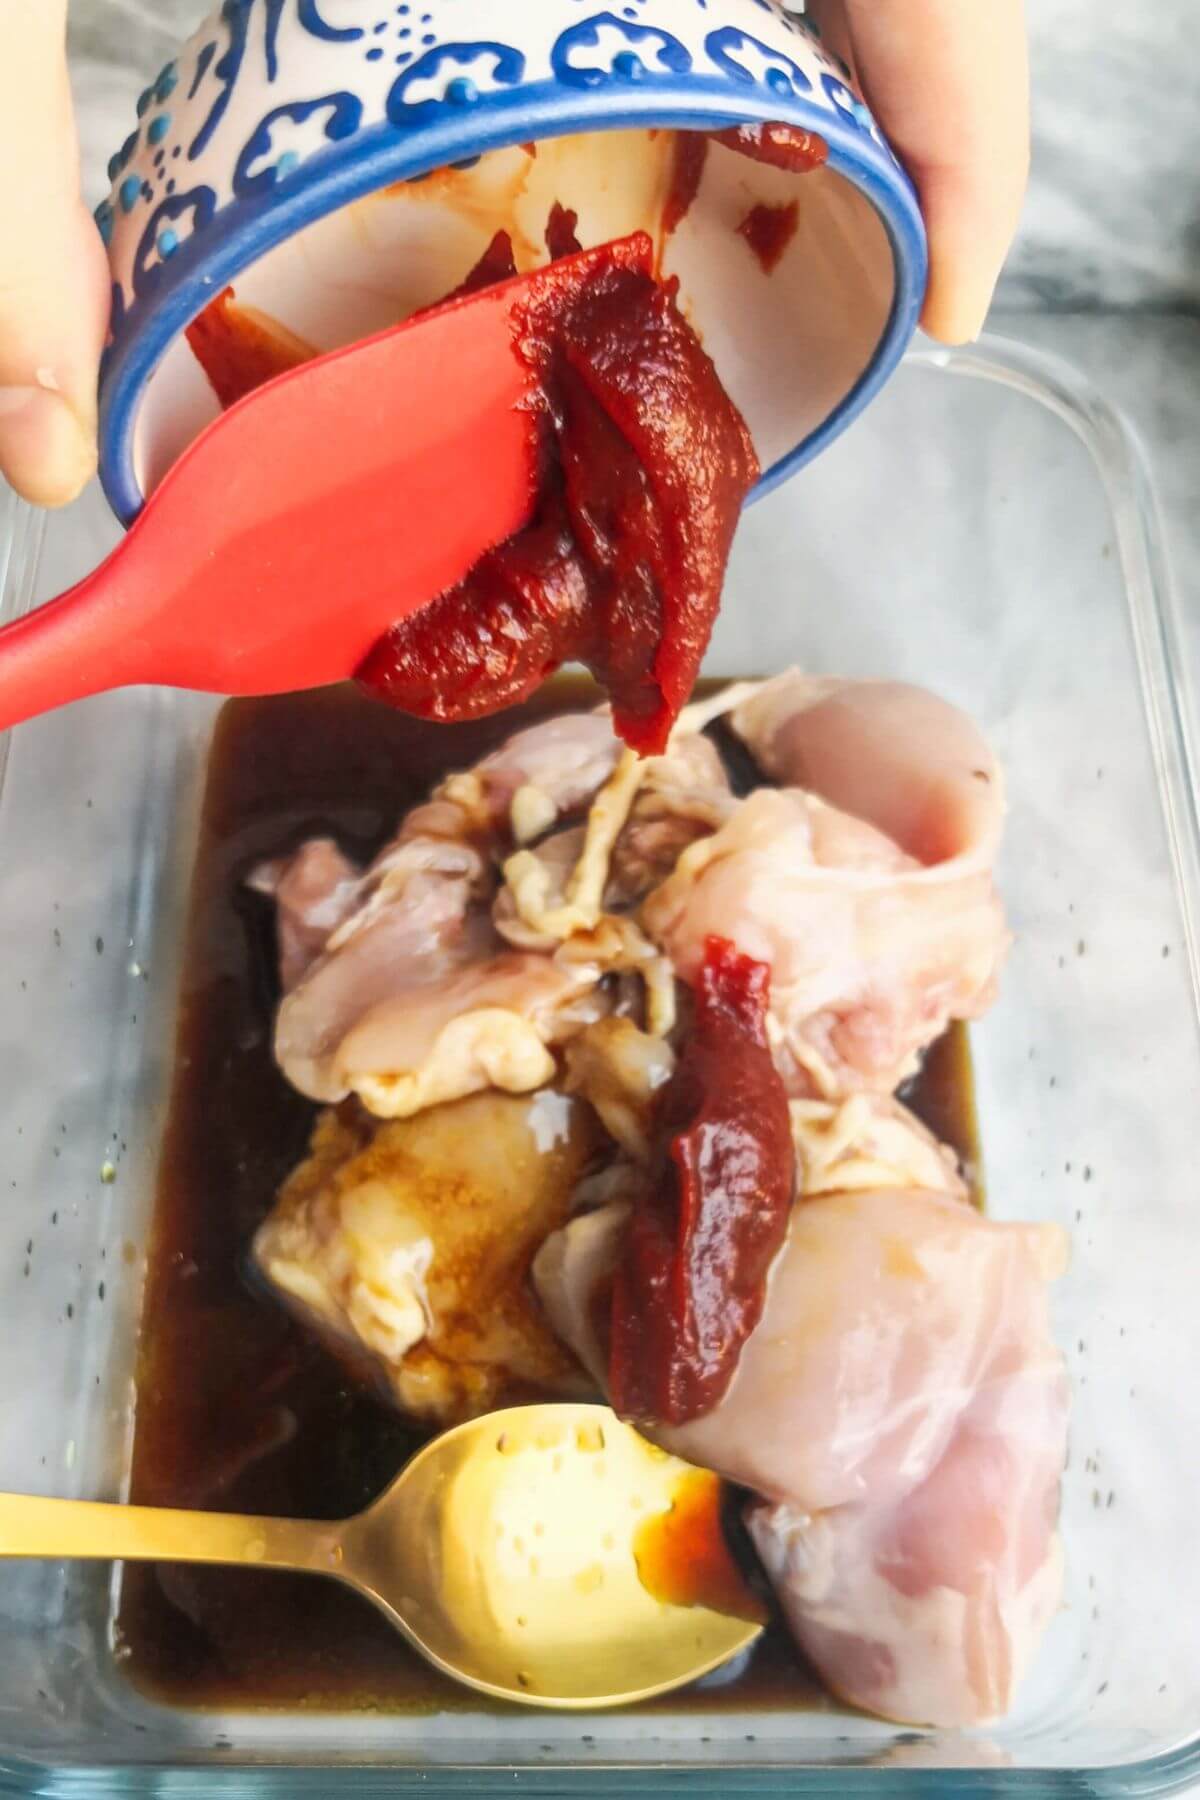 Gochujang paste being added to chicken in a large glass container.